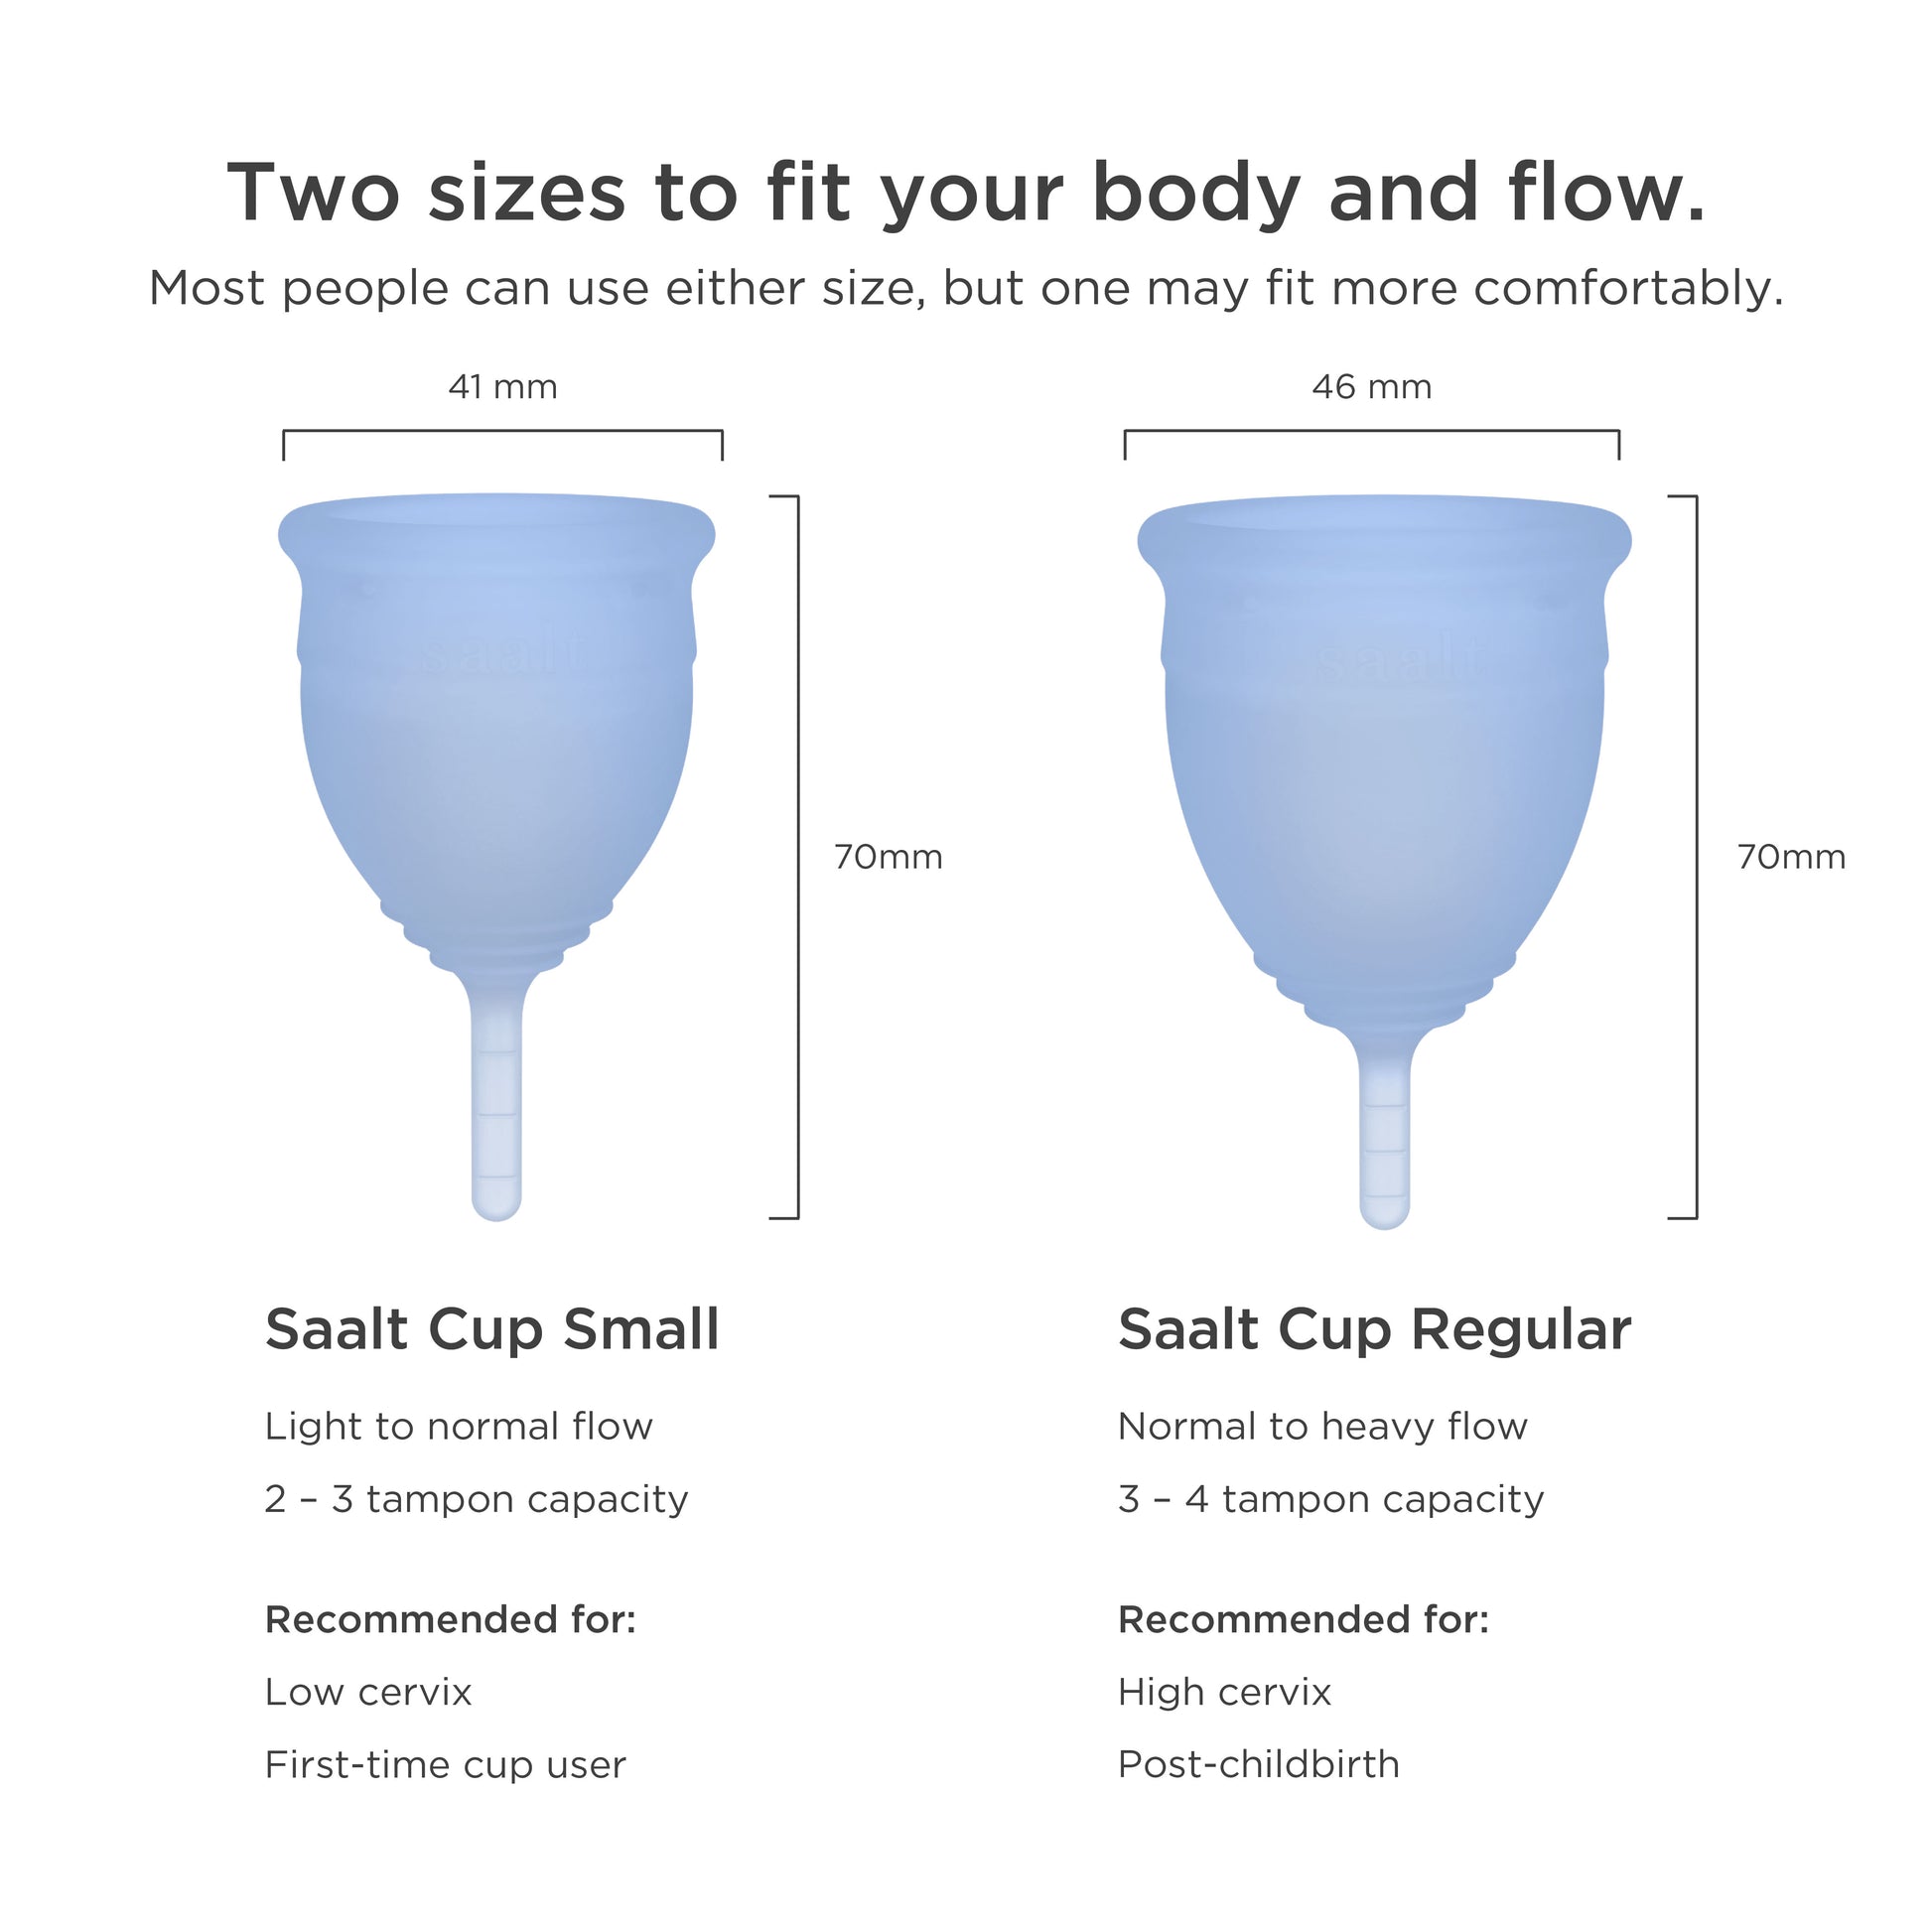 Menstrual cup maker Saalt of Boise, ID expands, adds products